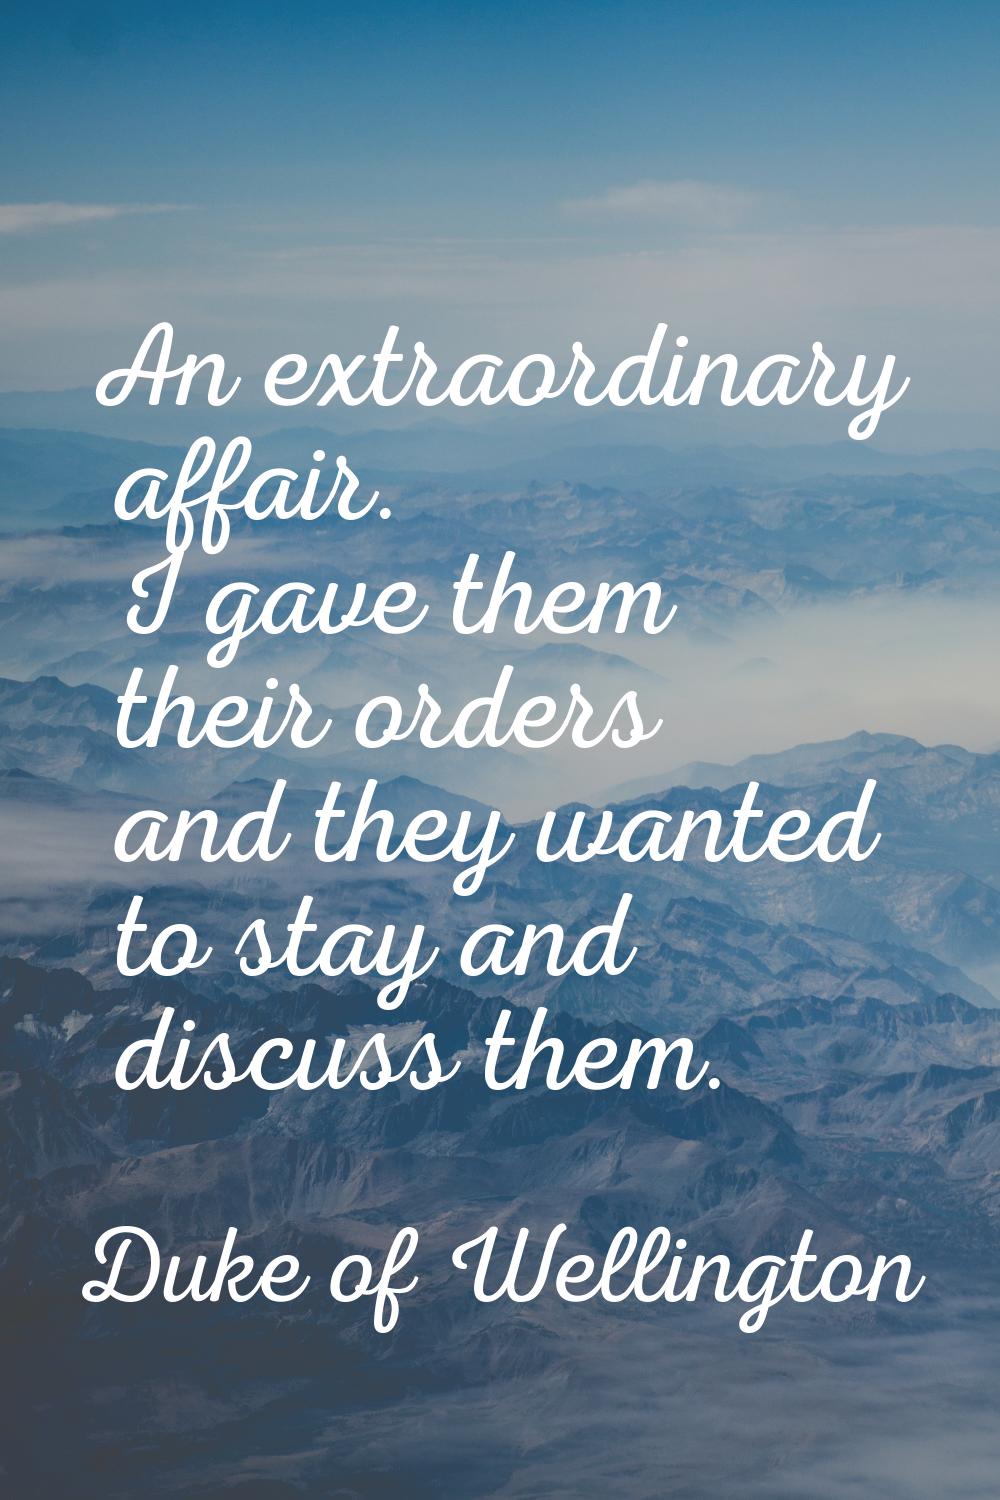 An extraordinary affair. I gave them their orders and they wanted to stay and discuss them.